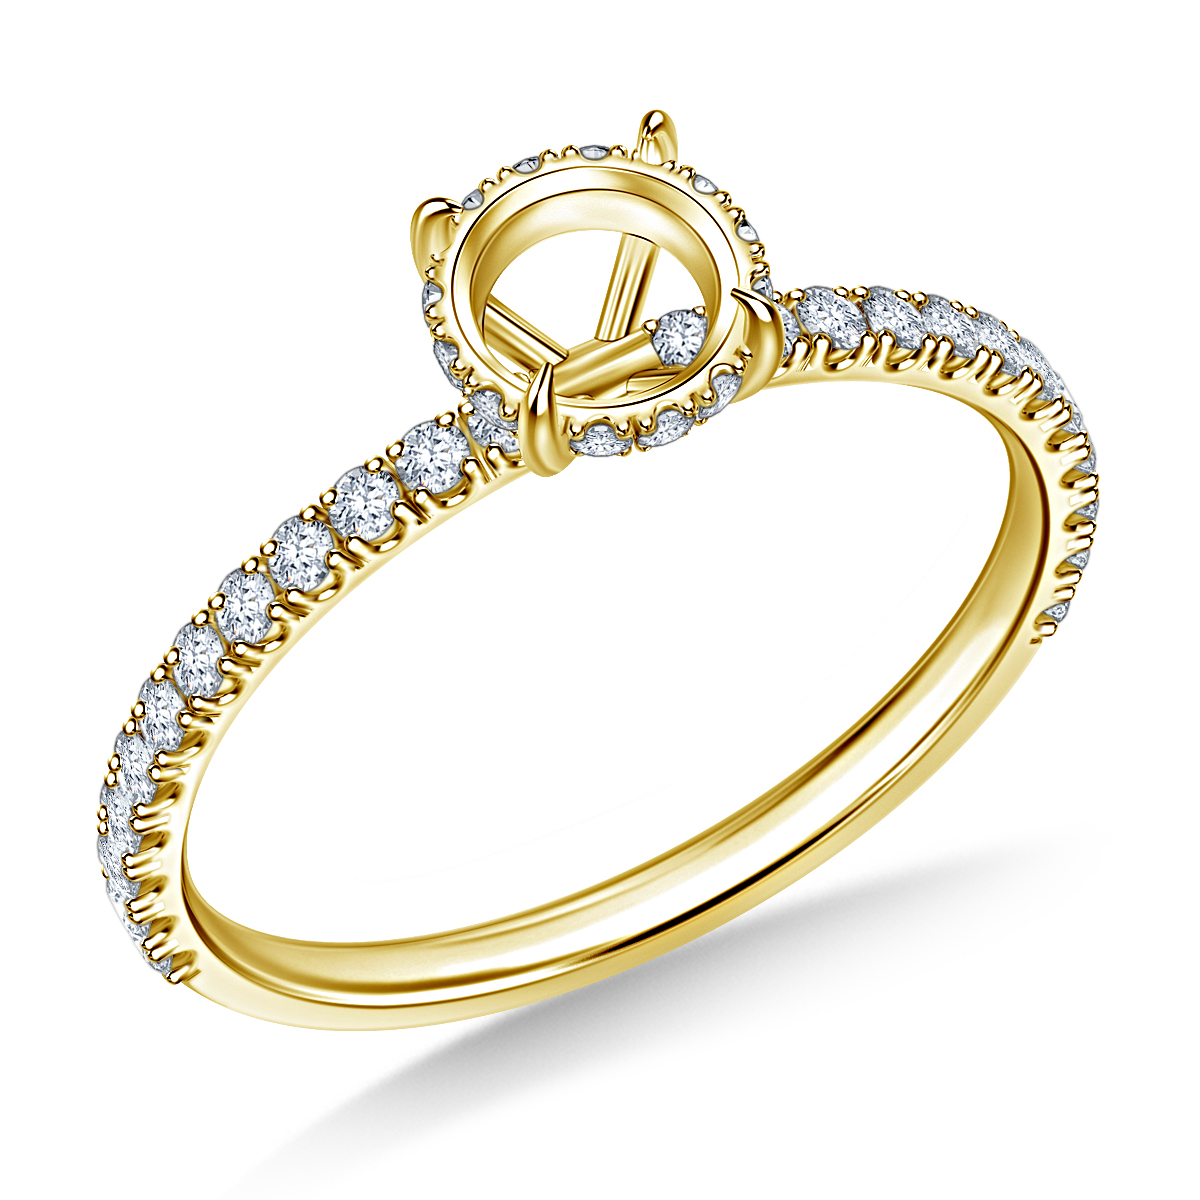 Diamond Semi Mount Ring Basket Setting with Diamond Accents in 14K